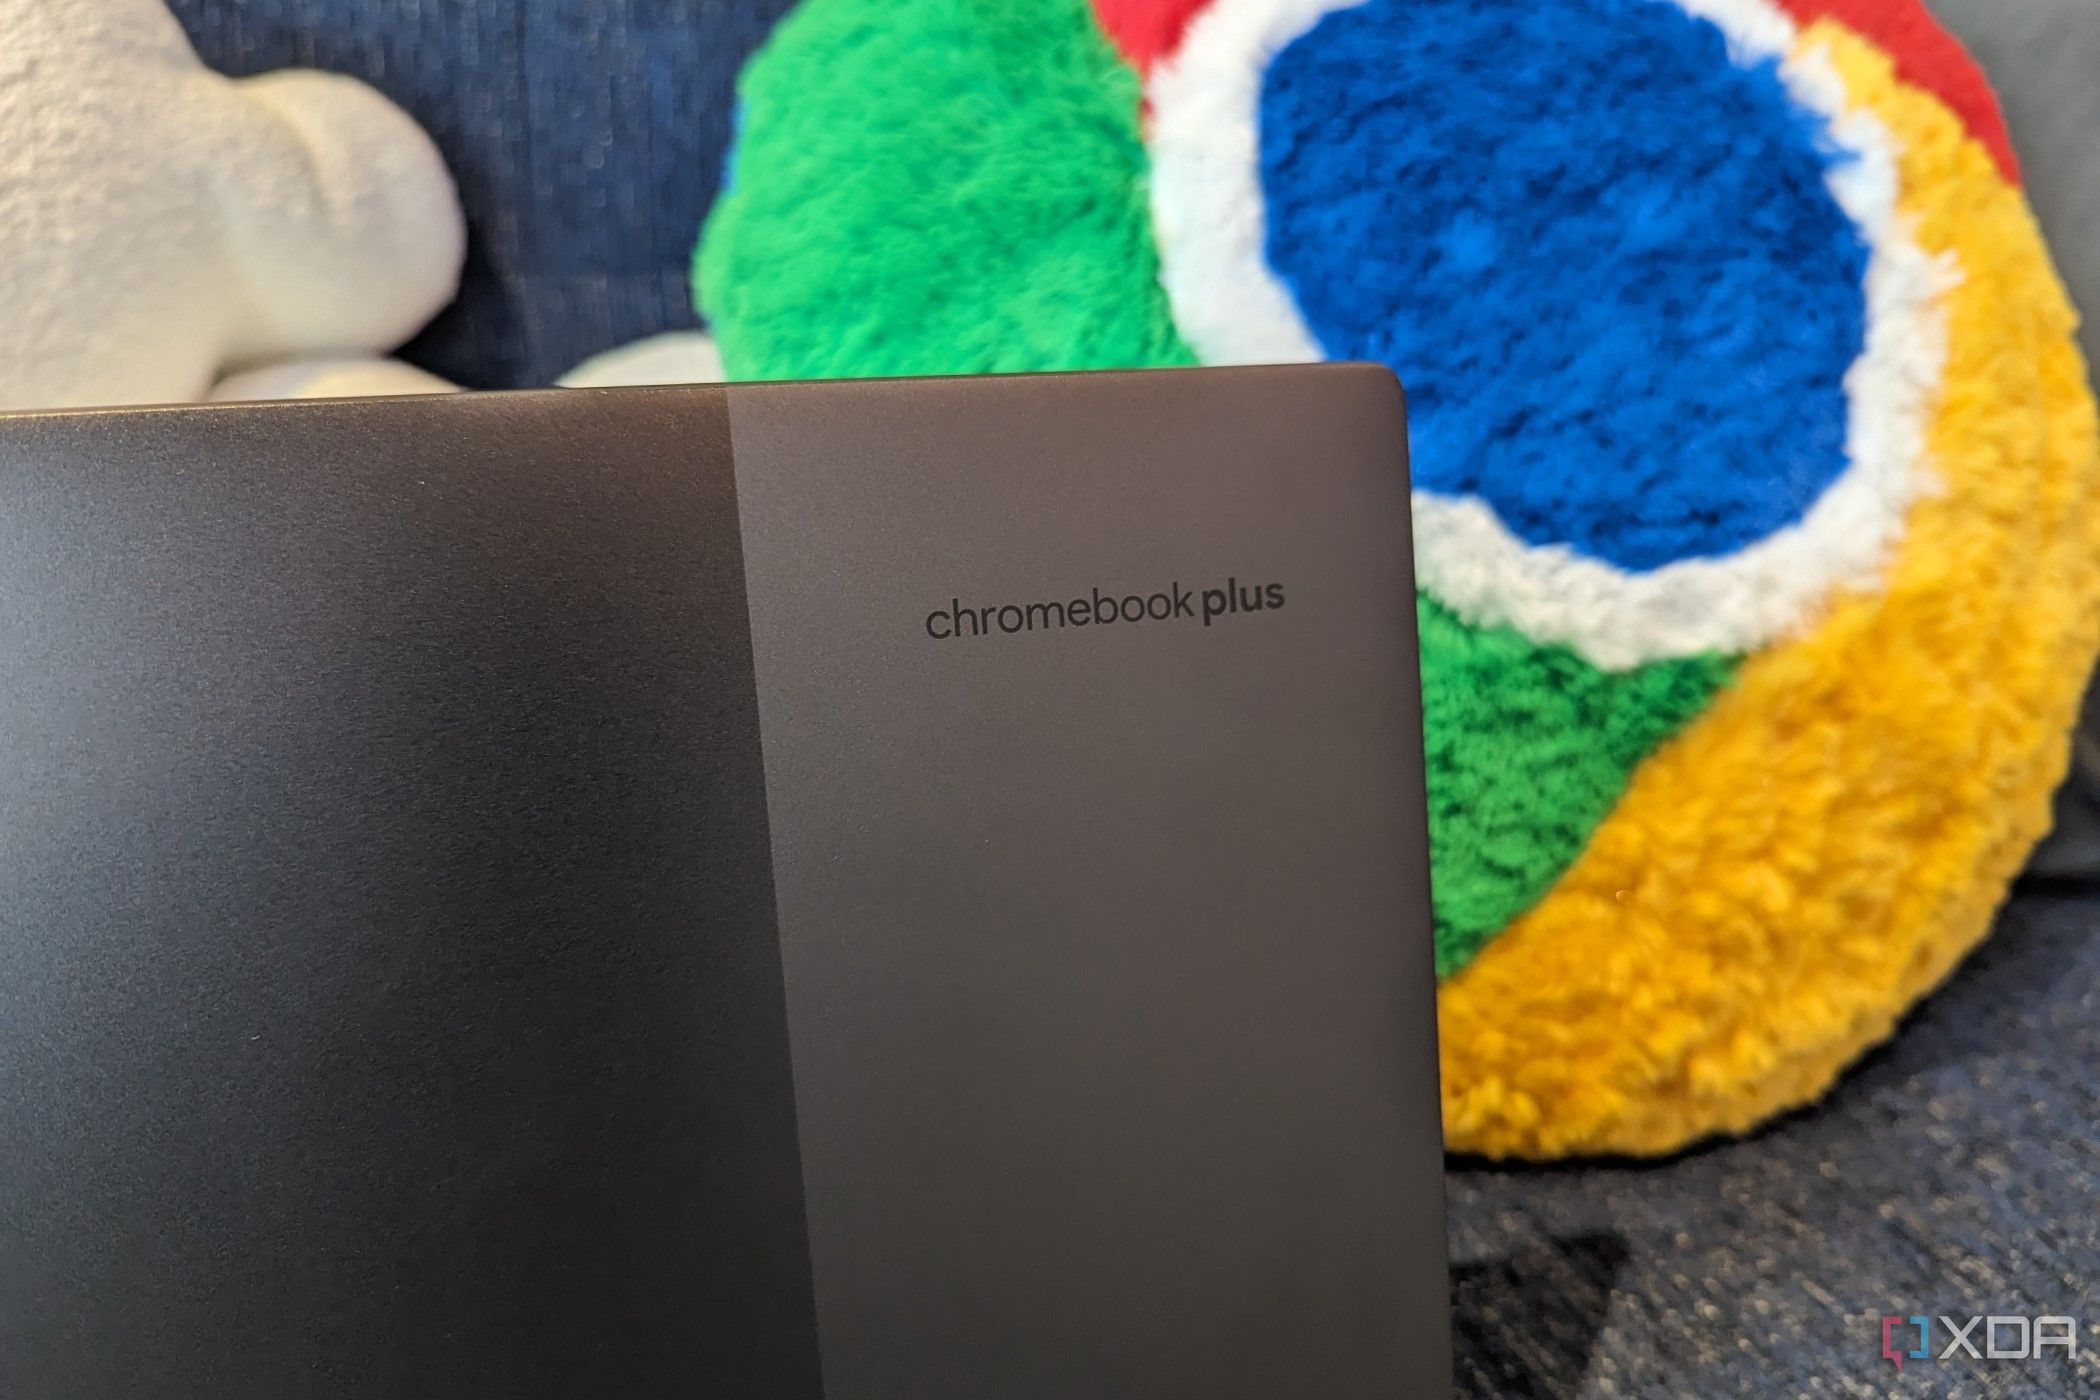 A Lenovo Chromebook Plus model with the Google Chrome pillow in the back